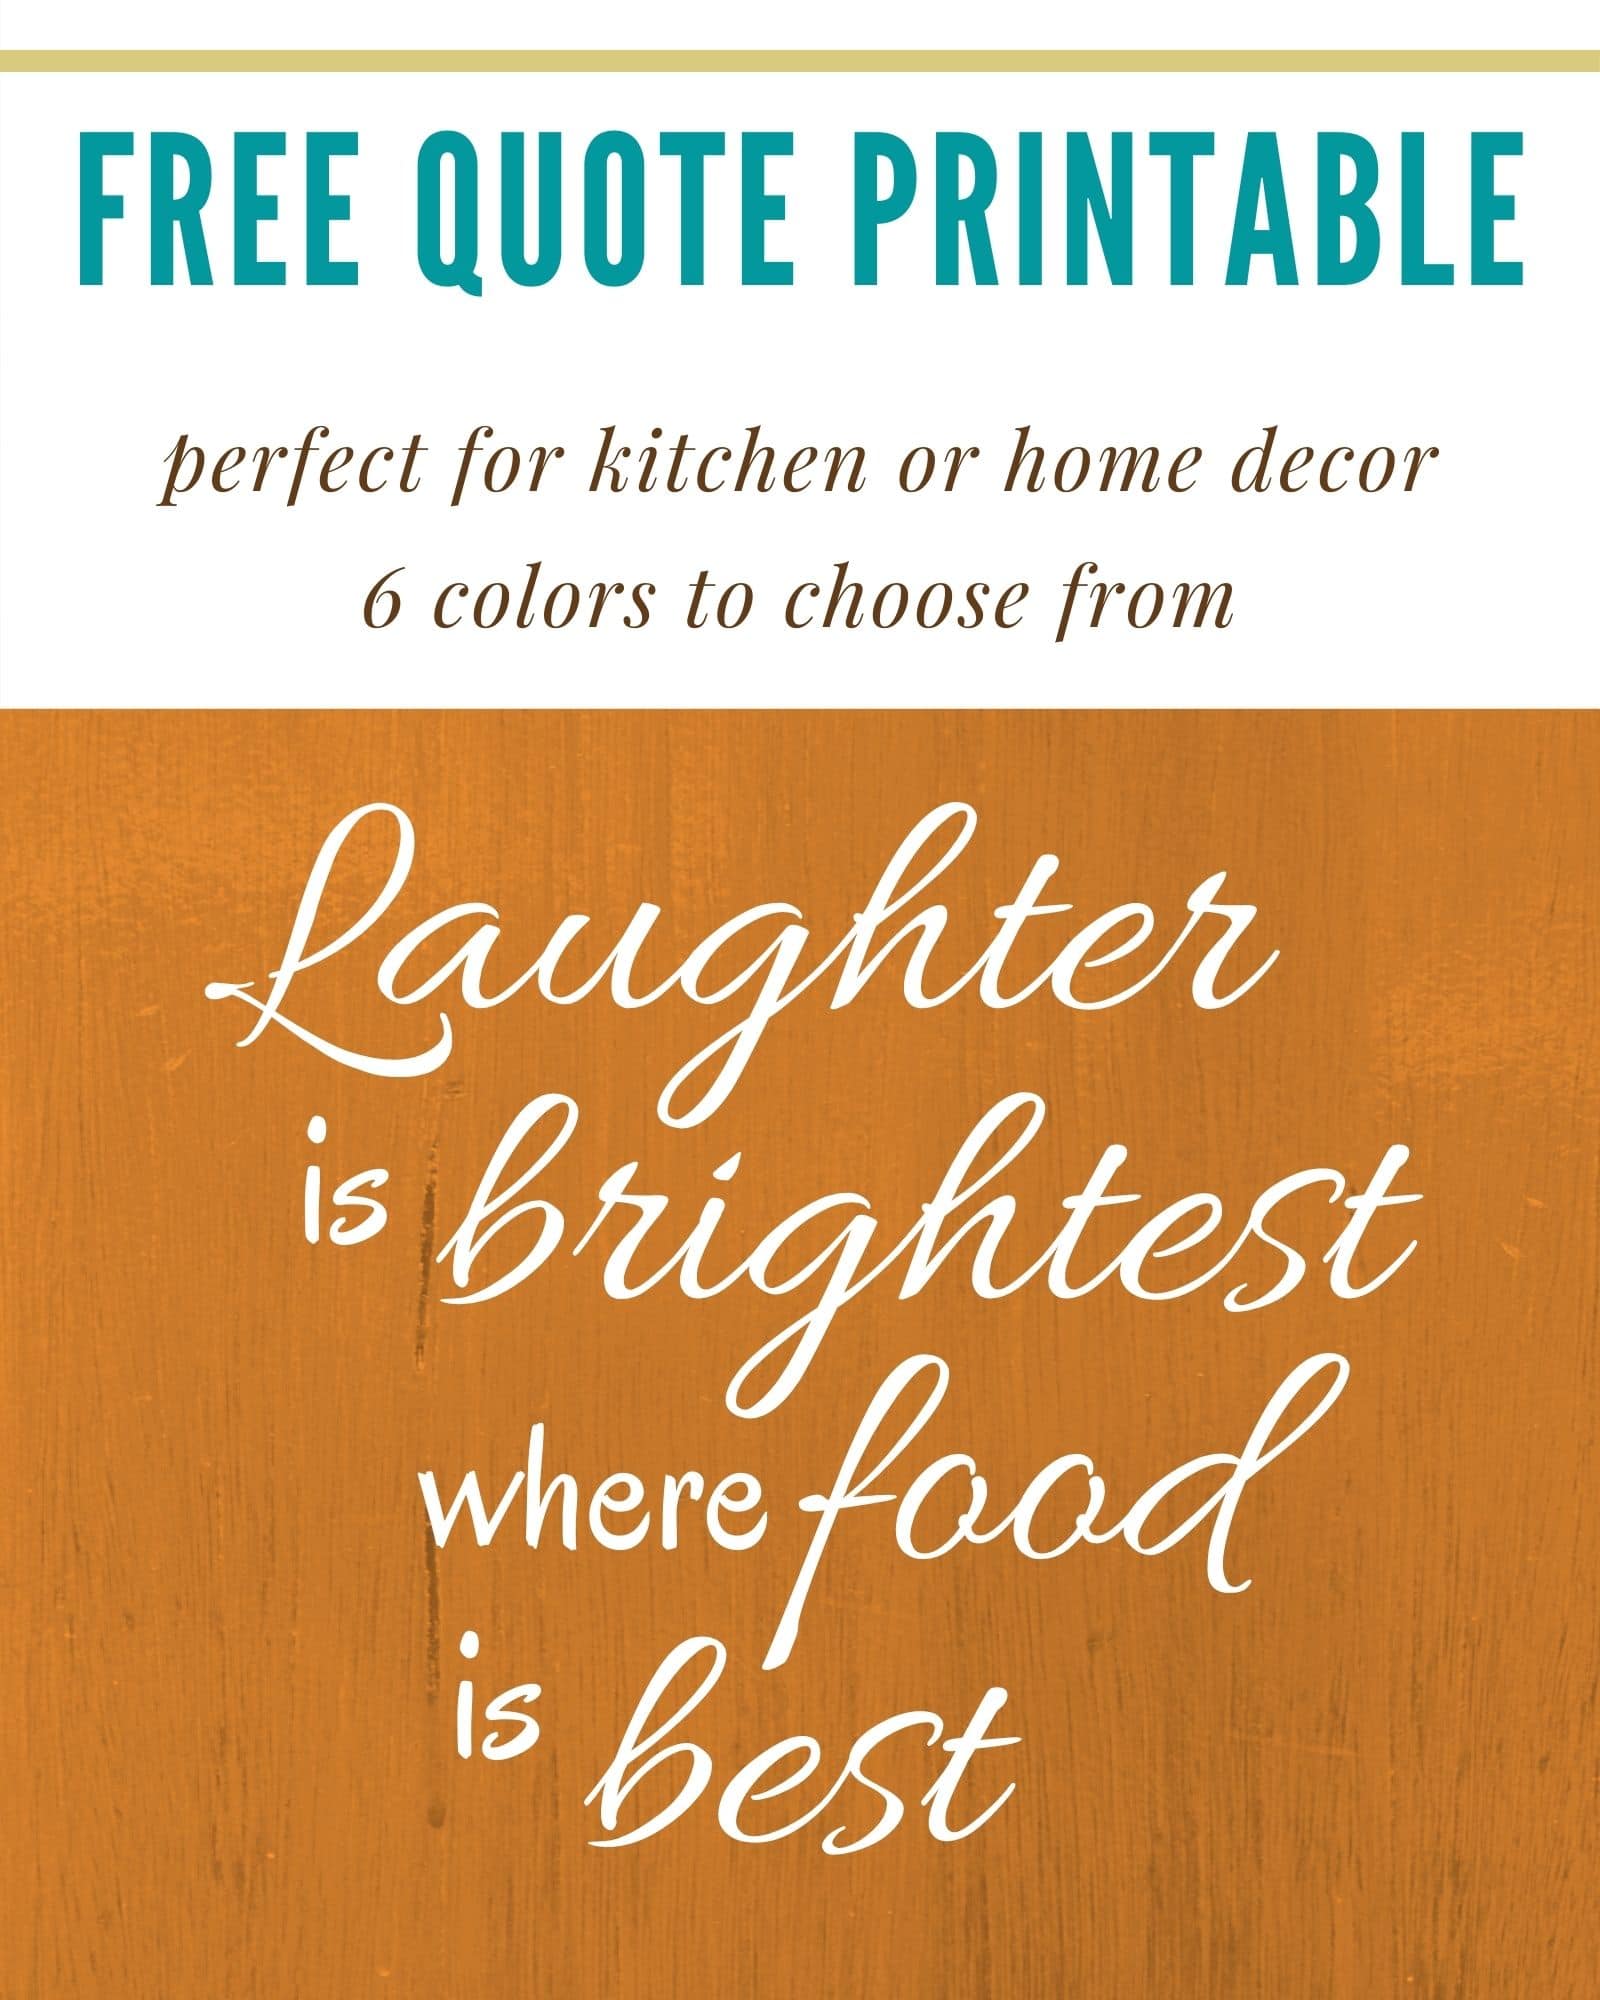 Laughter Is Brightest Free Home Decor Printable